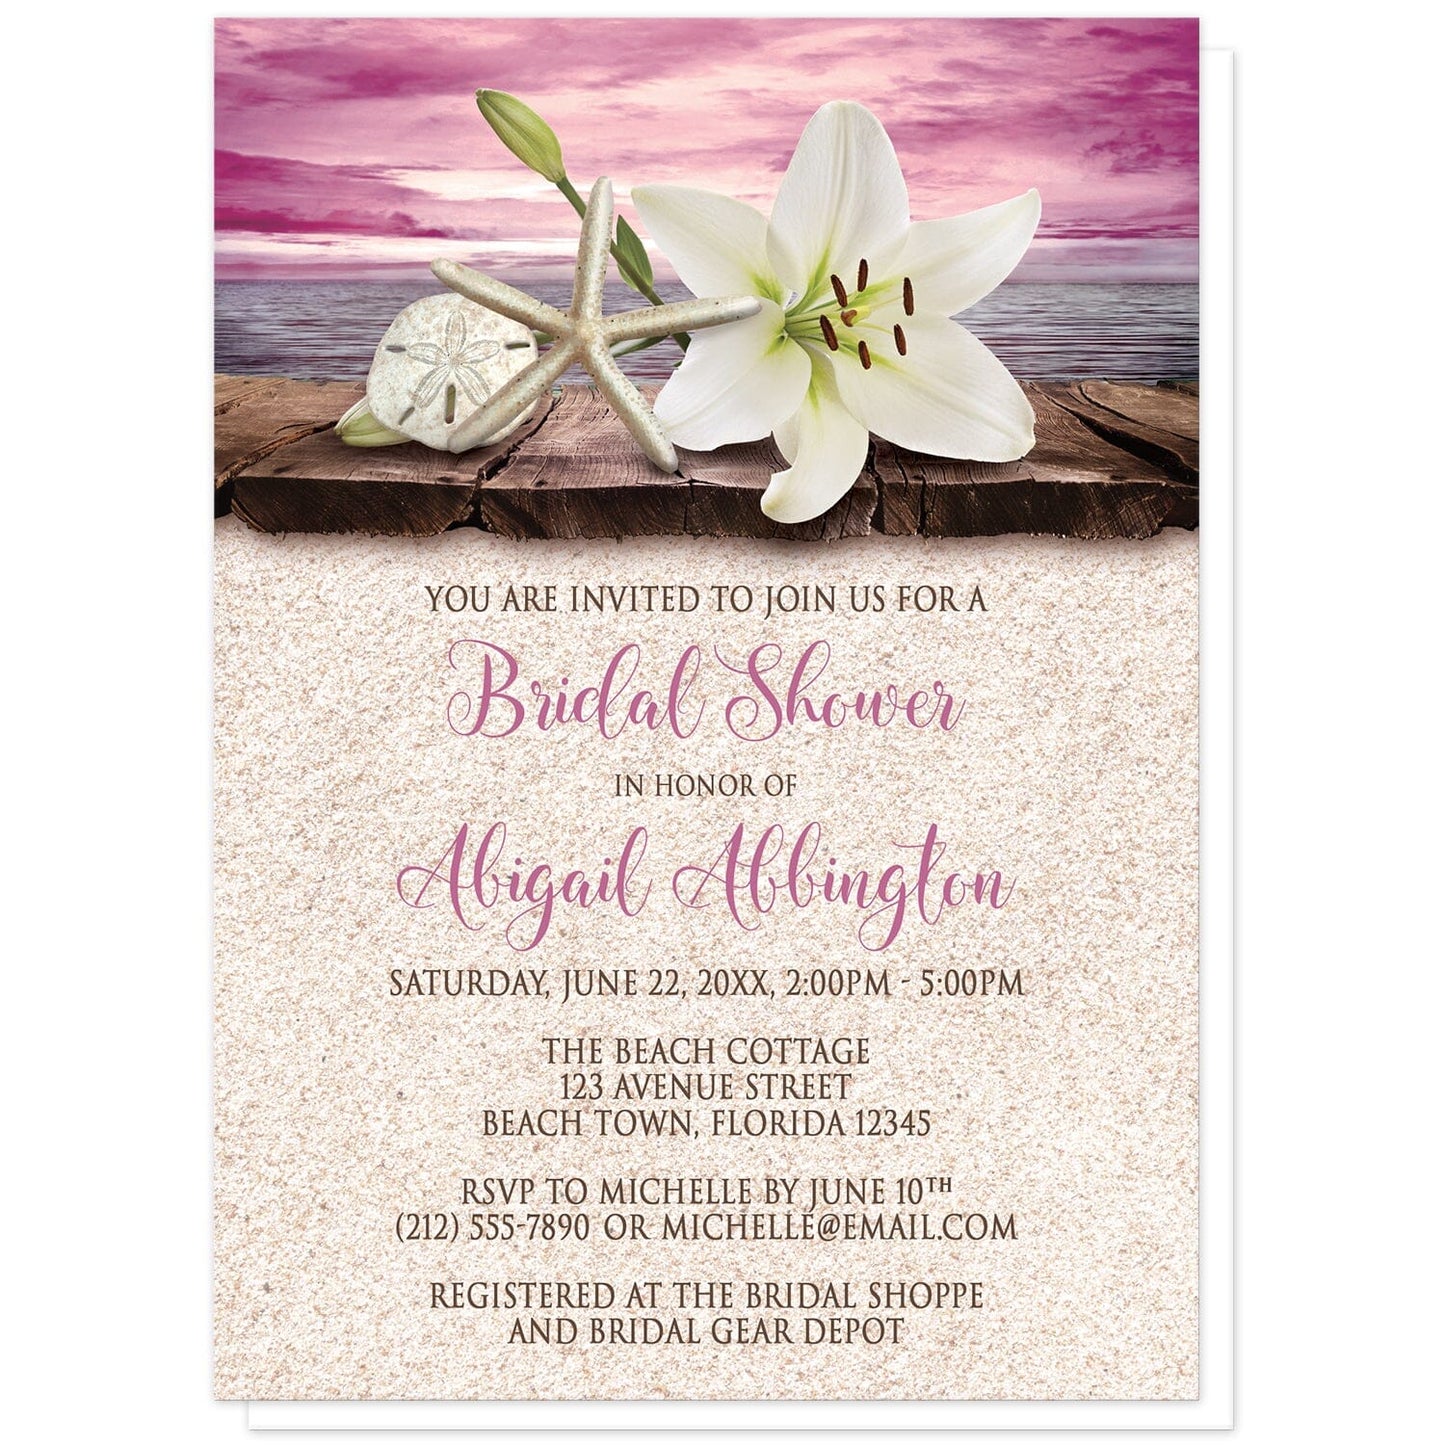 Lily Seashells and Sand Magenta Beach Bridal Shower Invitations at Artistically Invited. Tropical lily seashells and sand magenta beach bridal shower invitations with an elegant white lily, a starfish, and a sand dollar on a rustic wood dock overlooking the open water under a magenta sunset sky. Your personalized bridal shower celebration details are custom printed in dark brown and magenta over a beige sand background design.